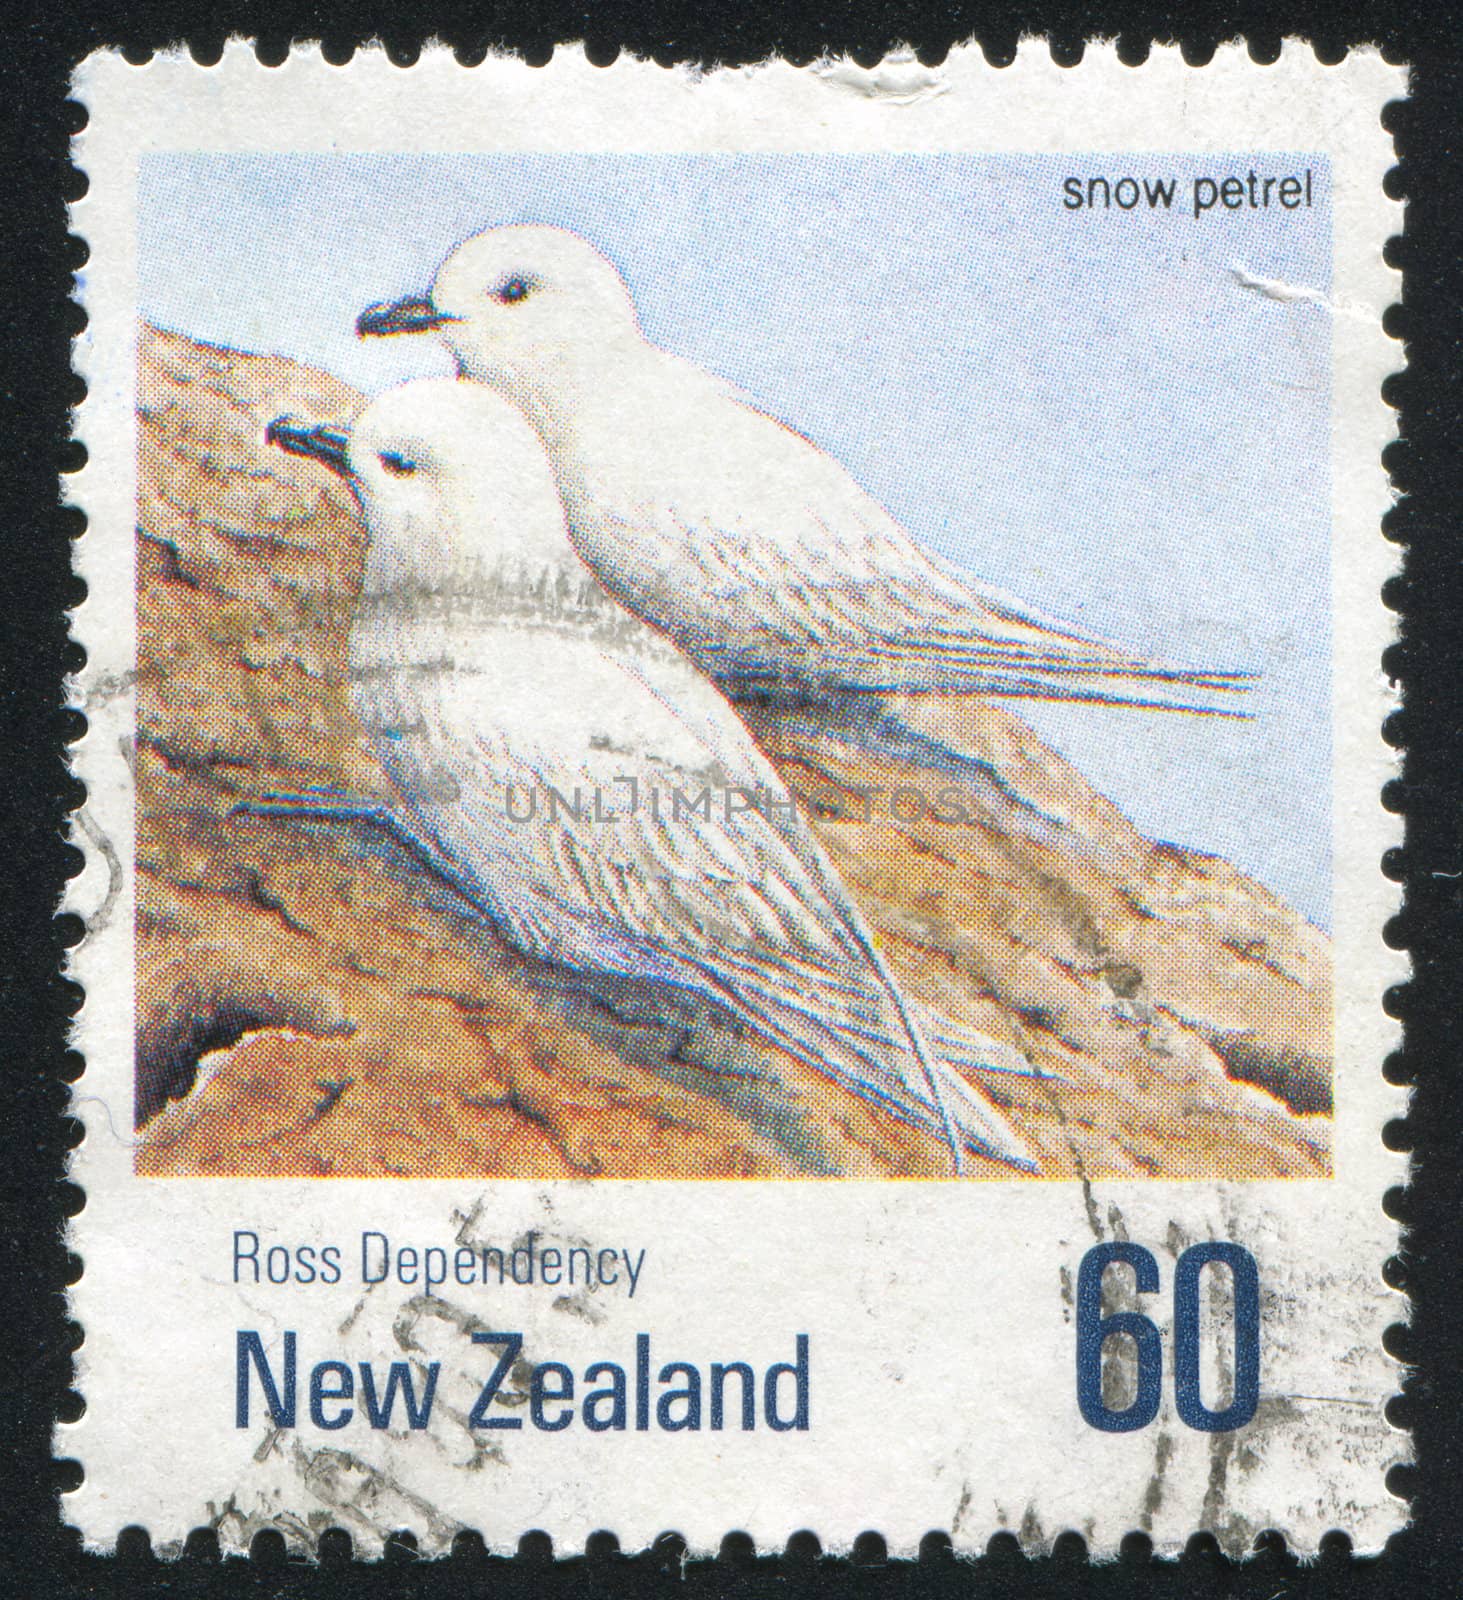 NEW ZEALAND — CIRCA 1990: stamp printed by New Zealand, shows snow petrel, circa 1990